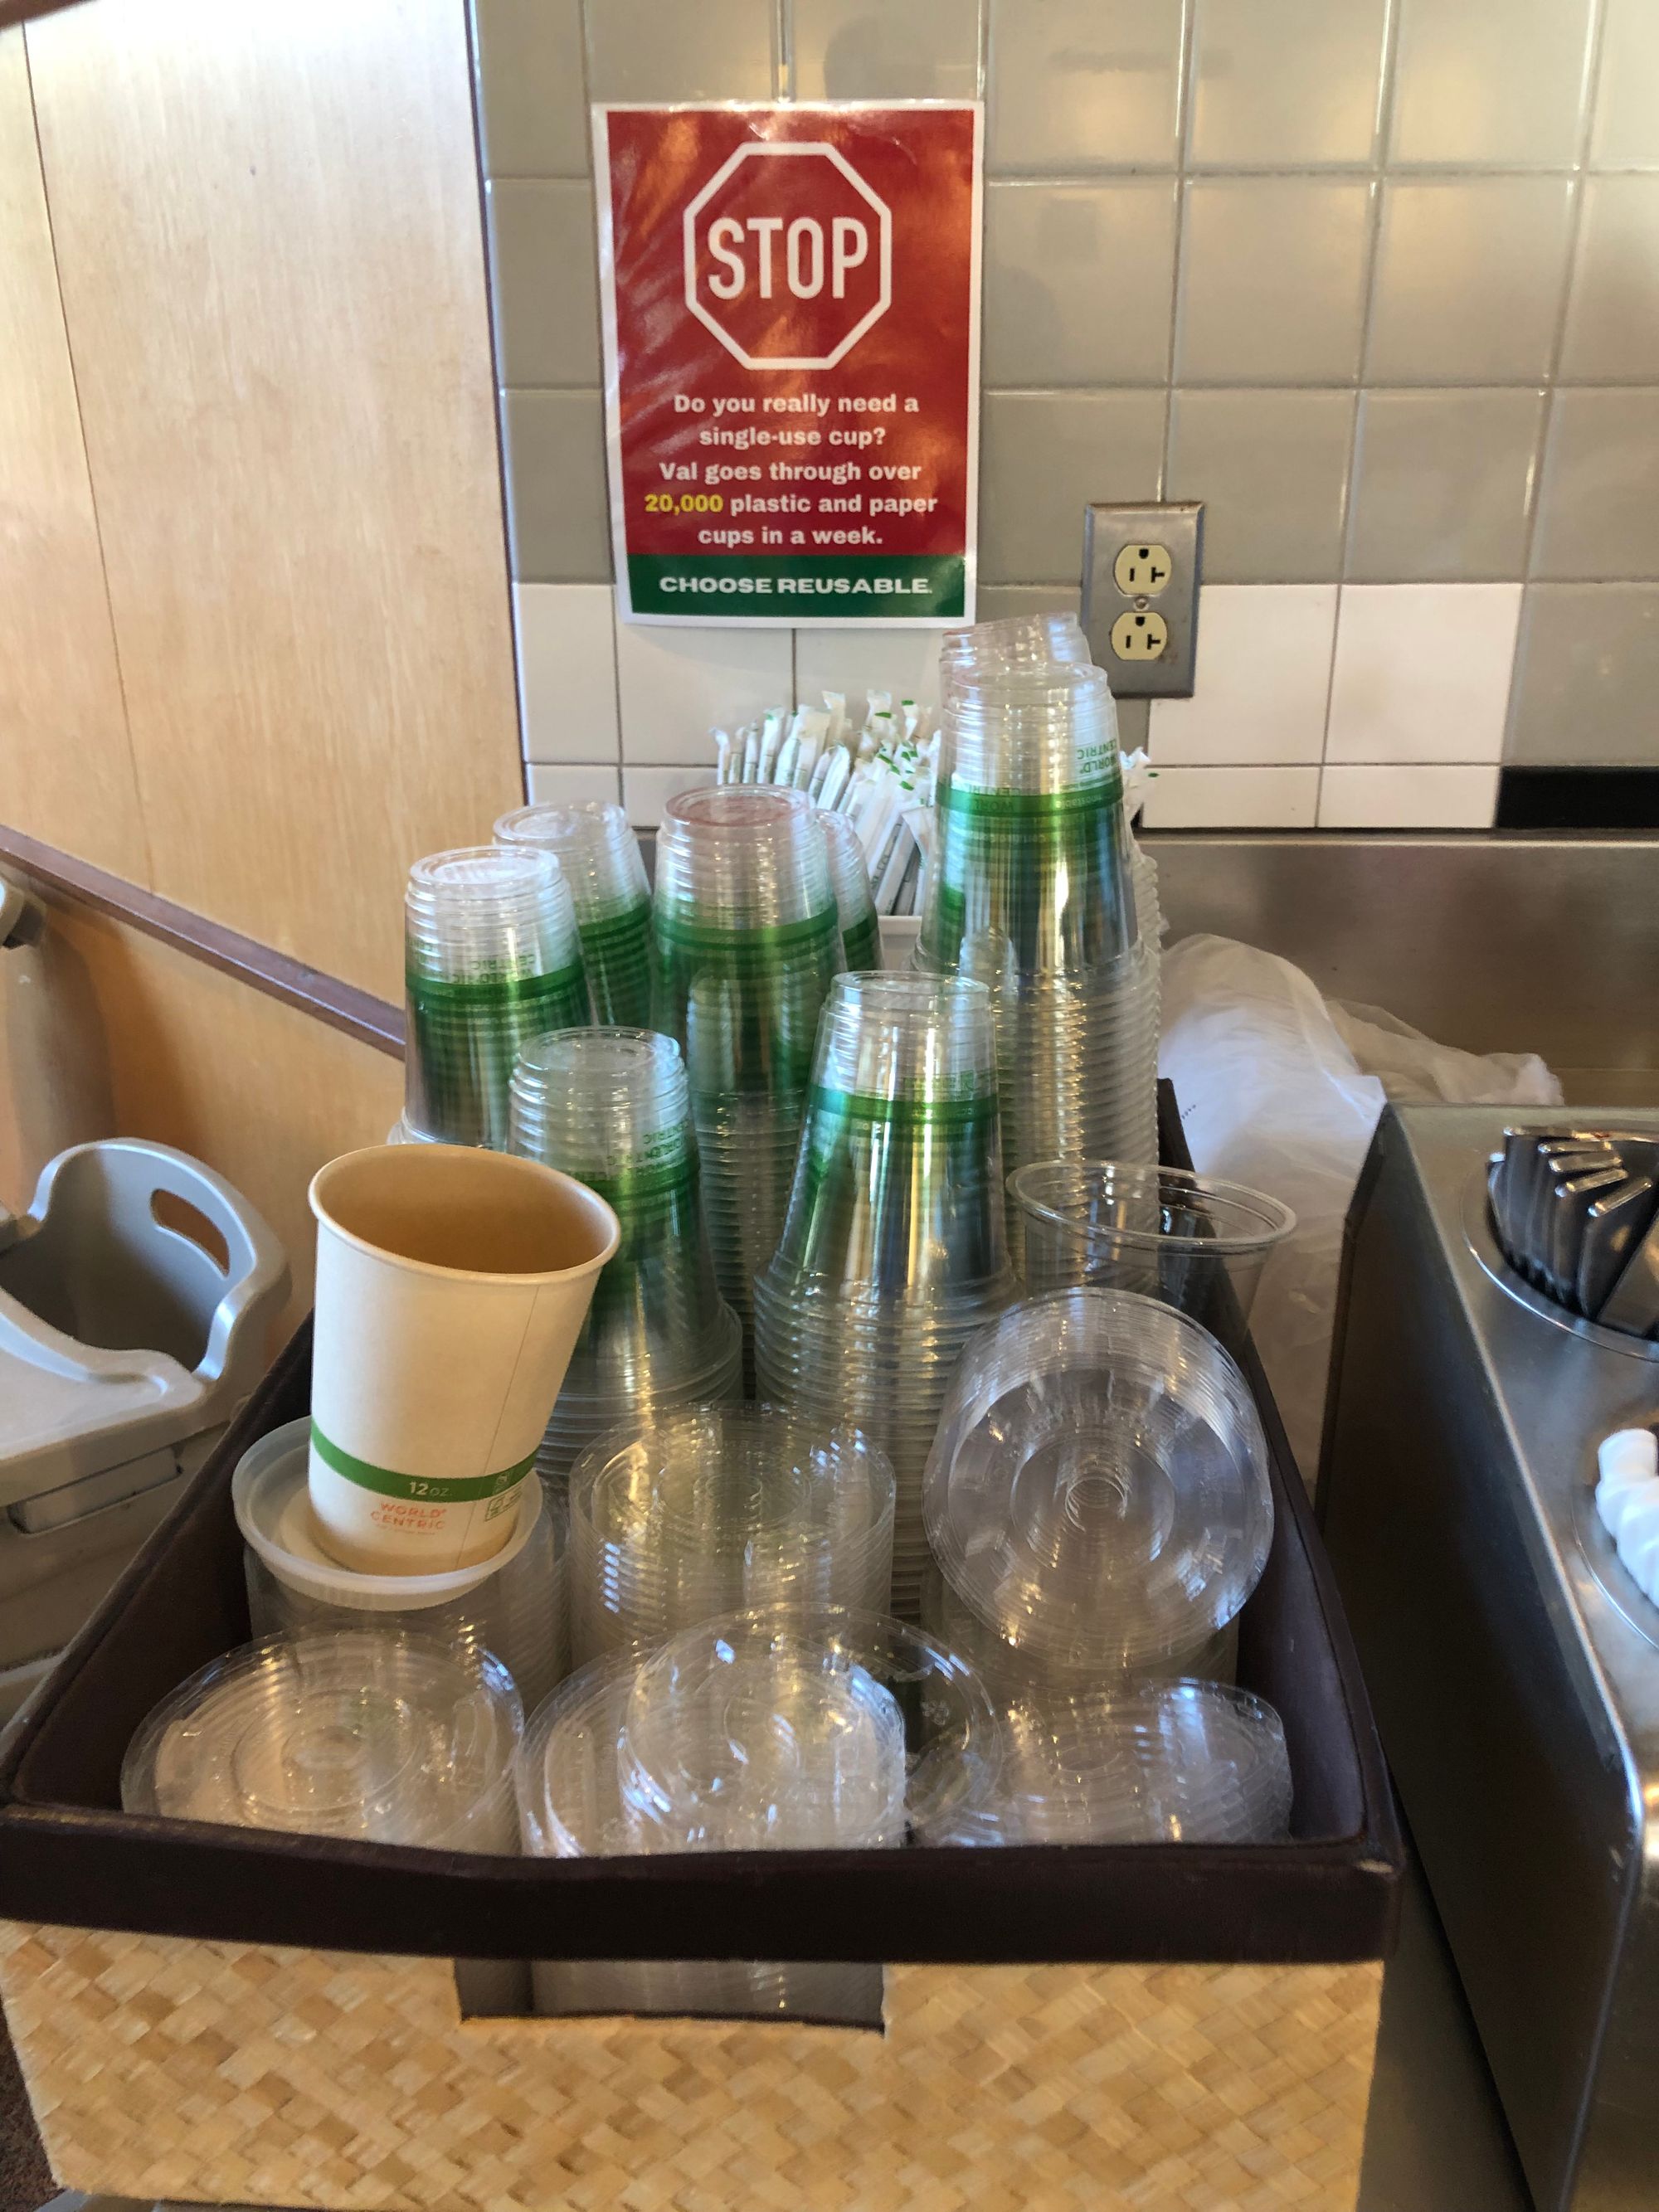 Starbucks plans to phase out its disposable cups